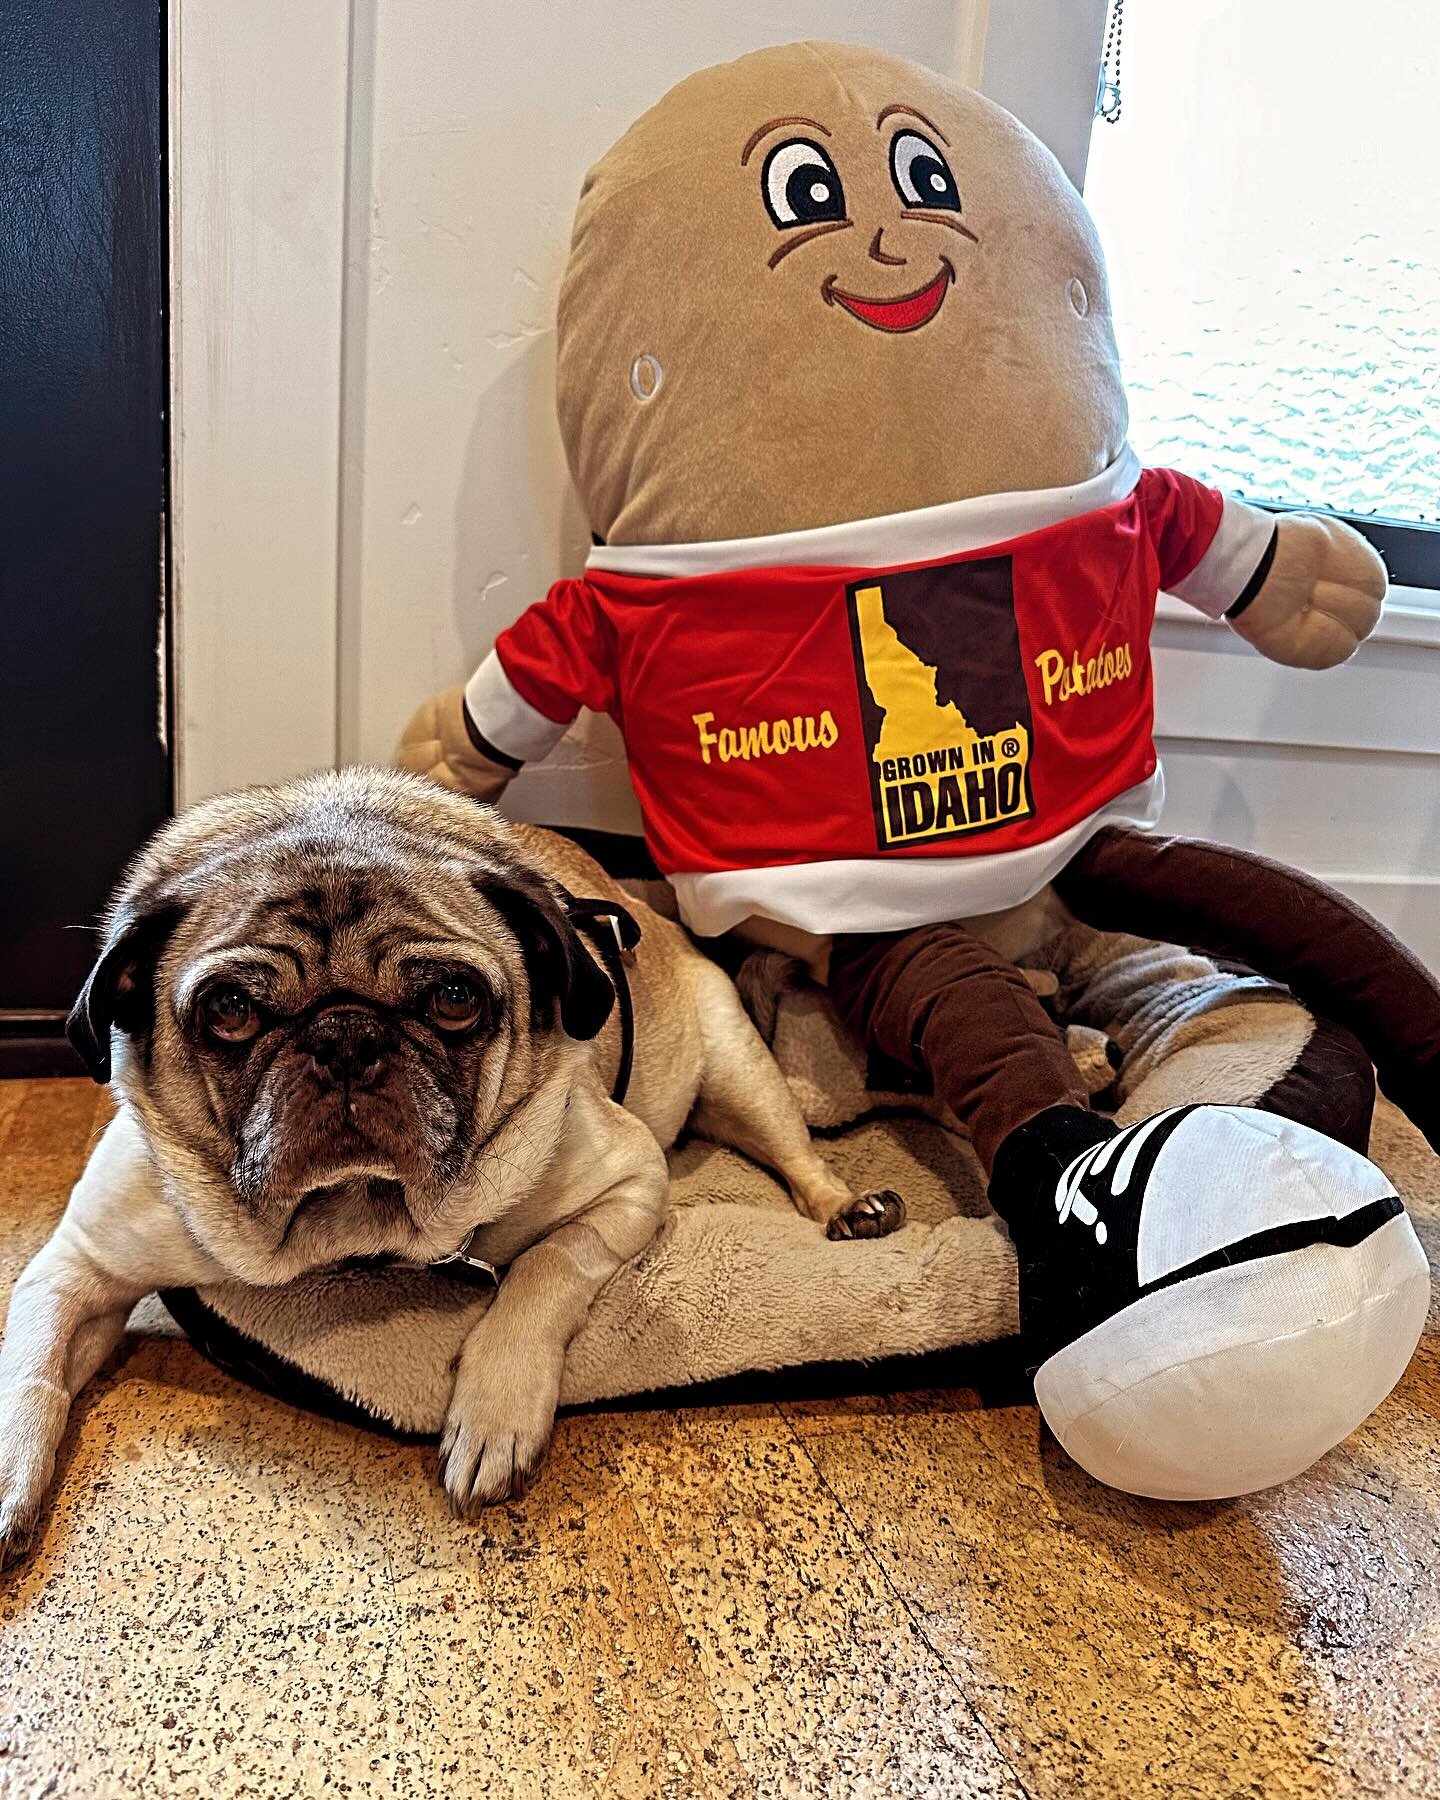 Jimmy is thrilled with his giant #spuddybuddy courtesy of @idahopotatoes. He has many mini spuddys, but requested a big one this year. He&rsquo;s very happy.